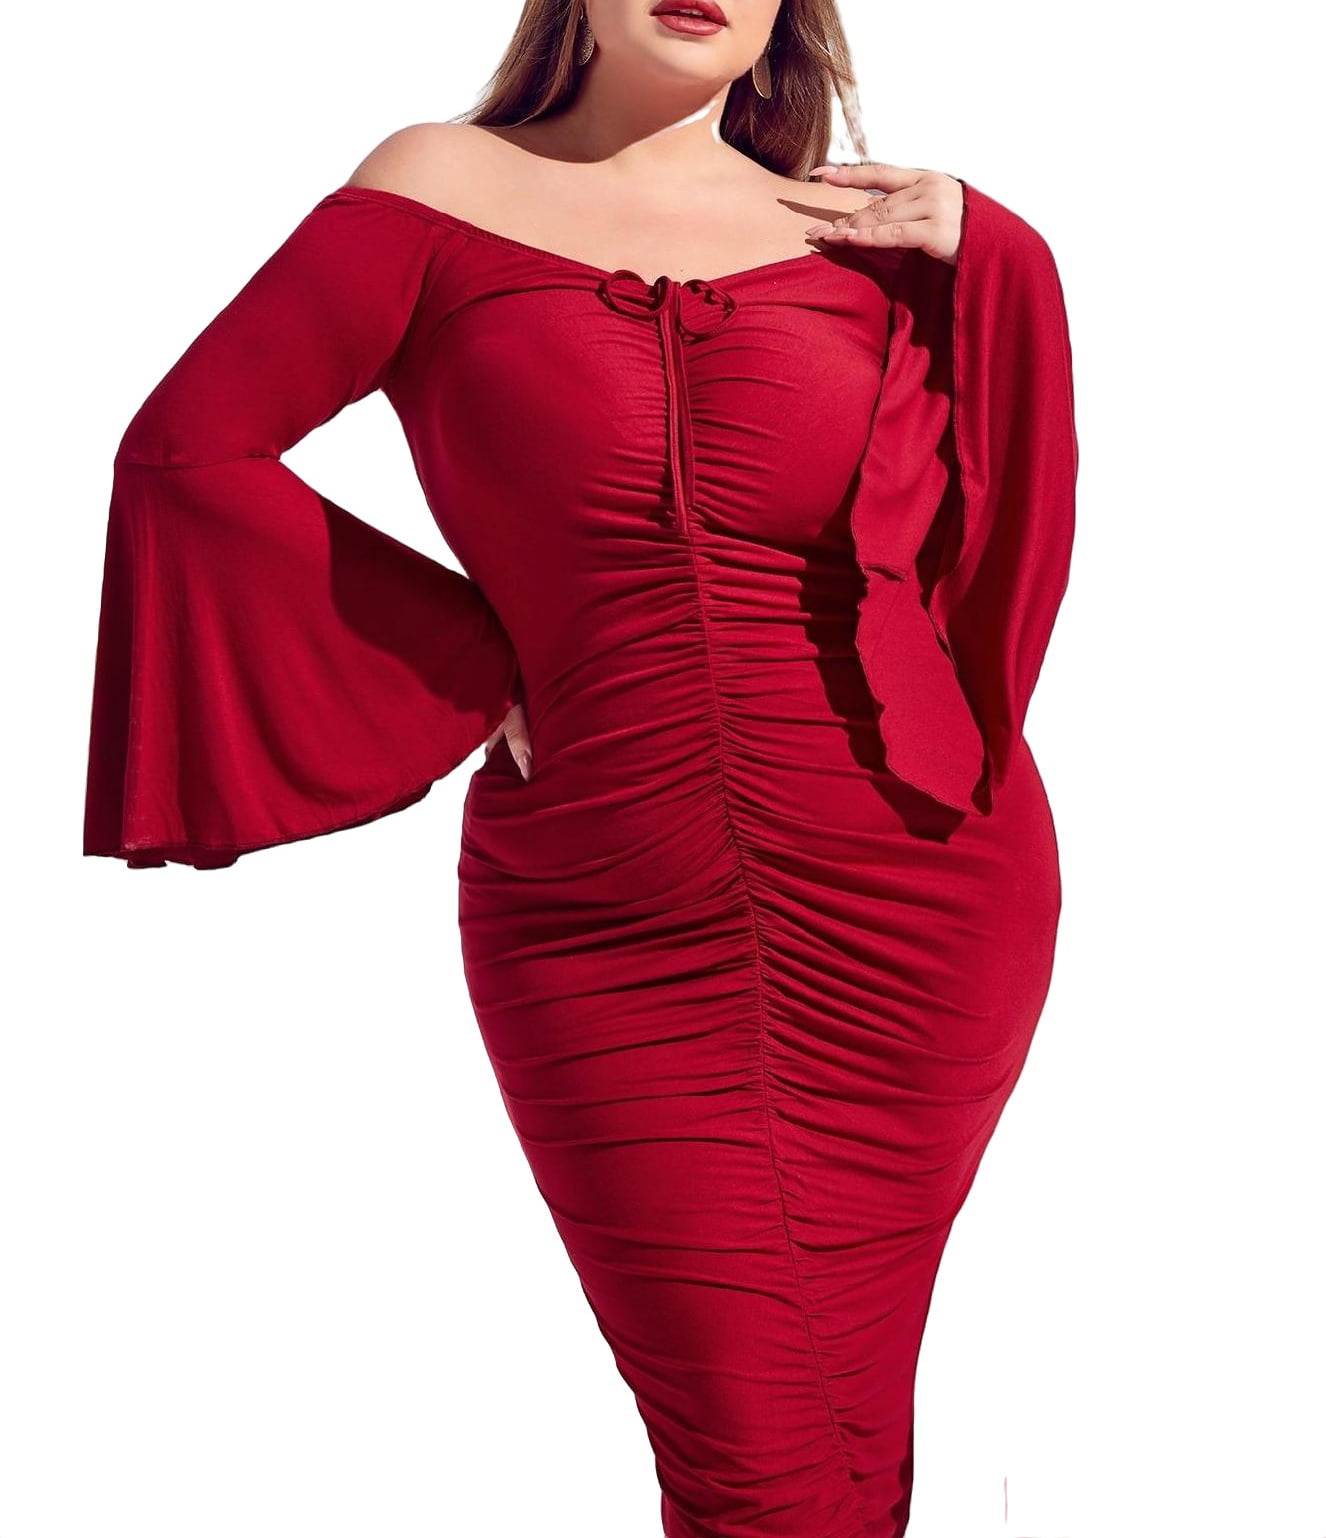 Women's Elegant Red Off the Shoulder Bodycon Long Sleeve Plus Size Dresses -